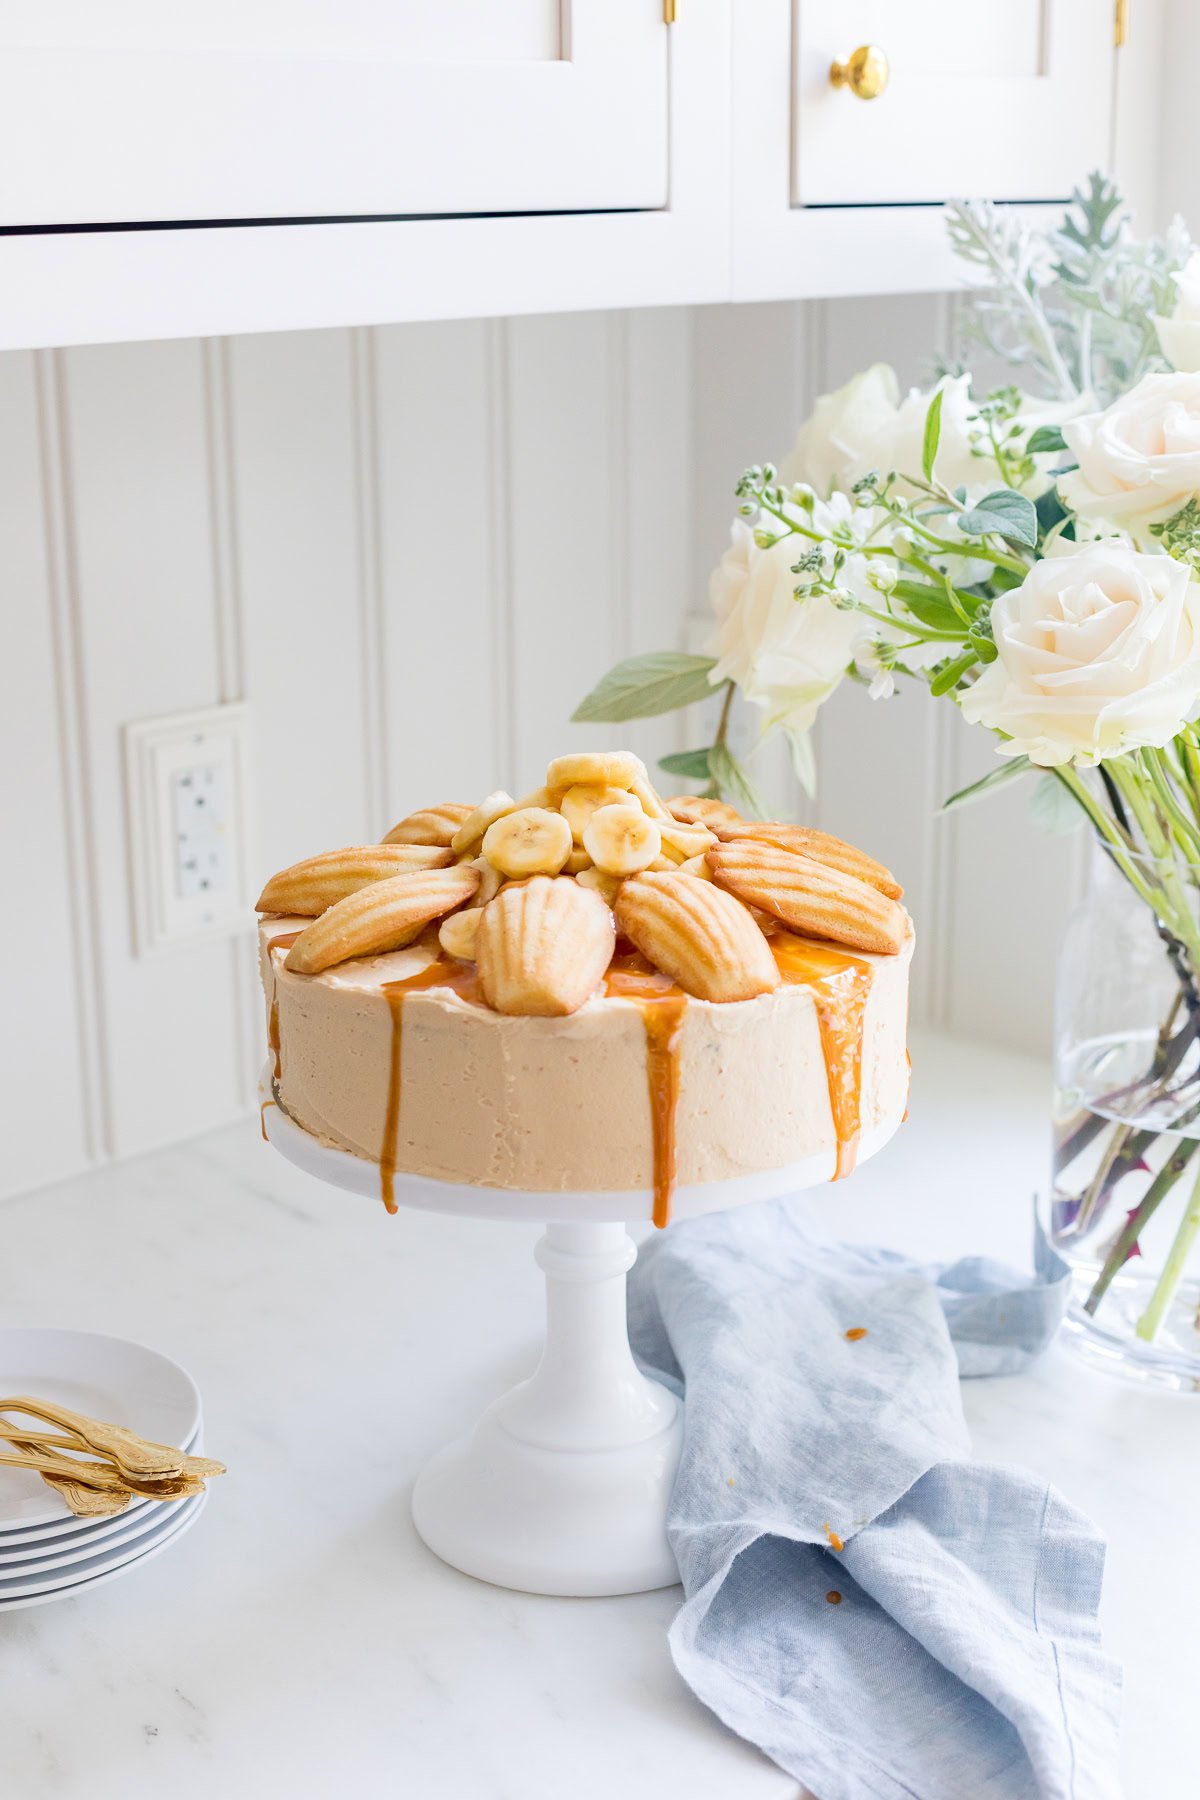 A caramel-drizzled cake topped with madeleines and banana slices, adorned with a layer of salted caramel frosting, sits on a white cake stand beside a vase of white flowers in a kitchen setting.